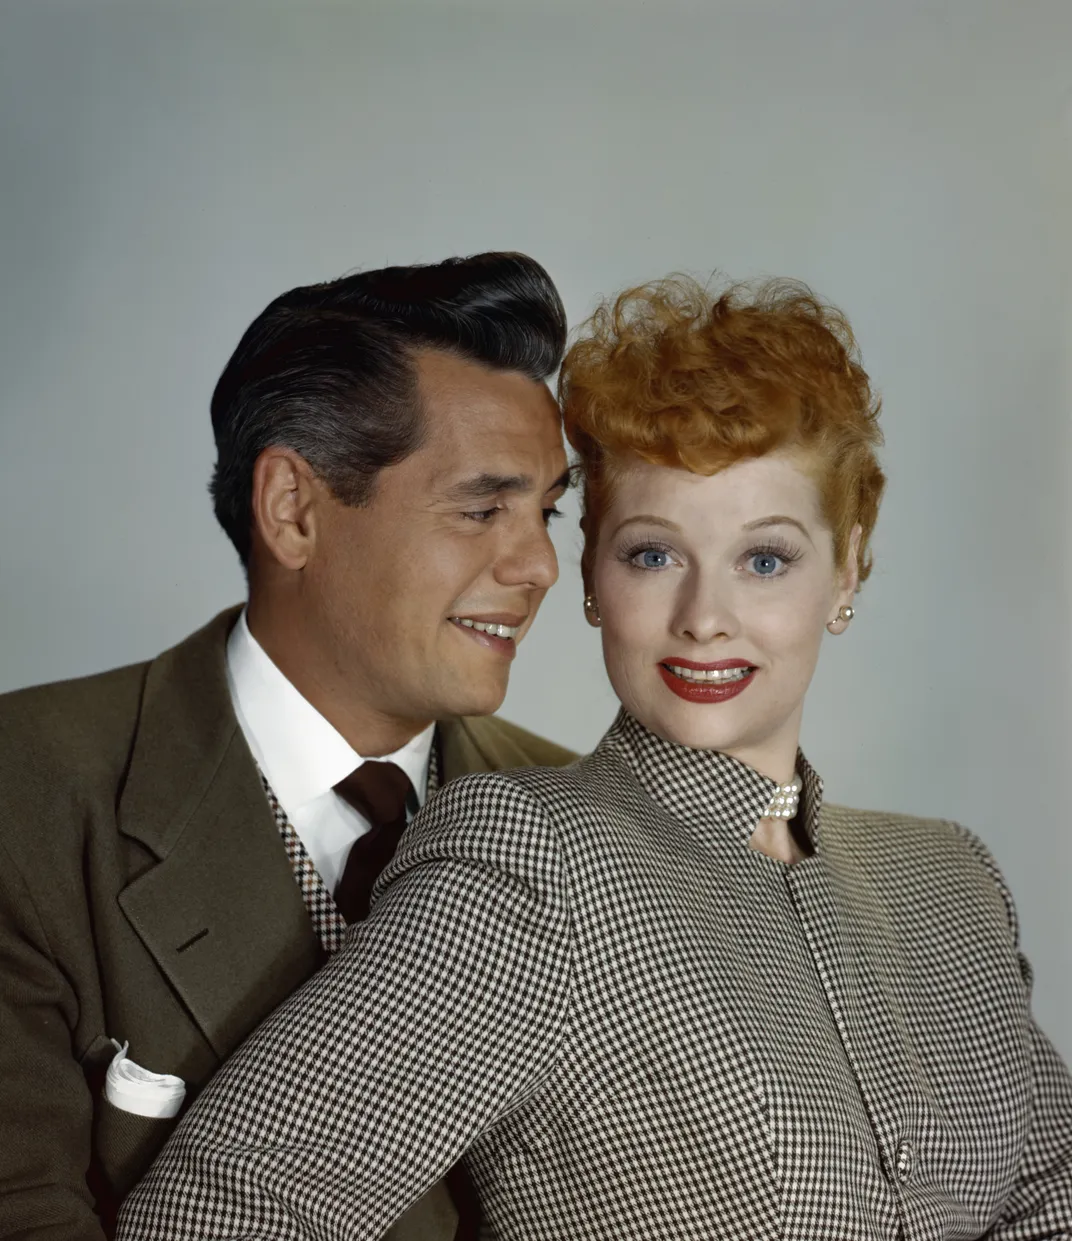 1950s studio photo of Desi Arnaz and Lucille Ball